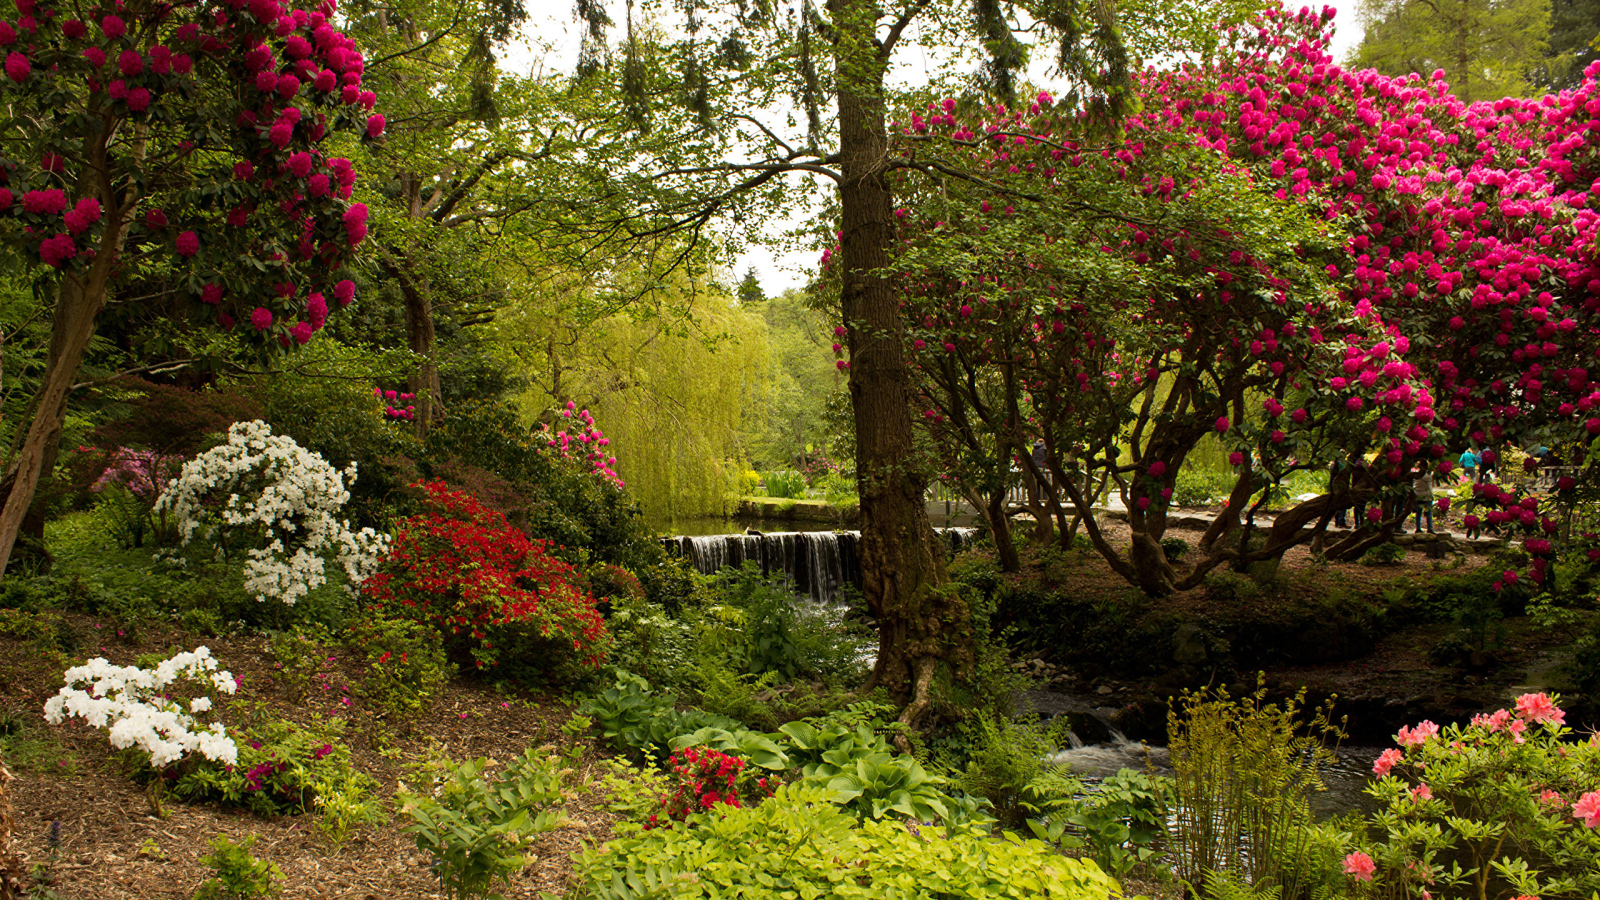 Beautiful picturesque park with flowering bushes